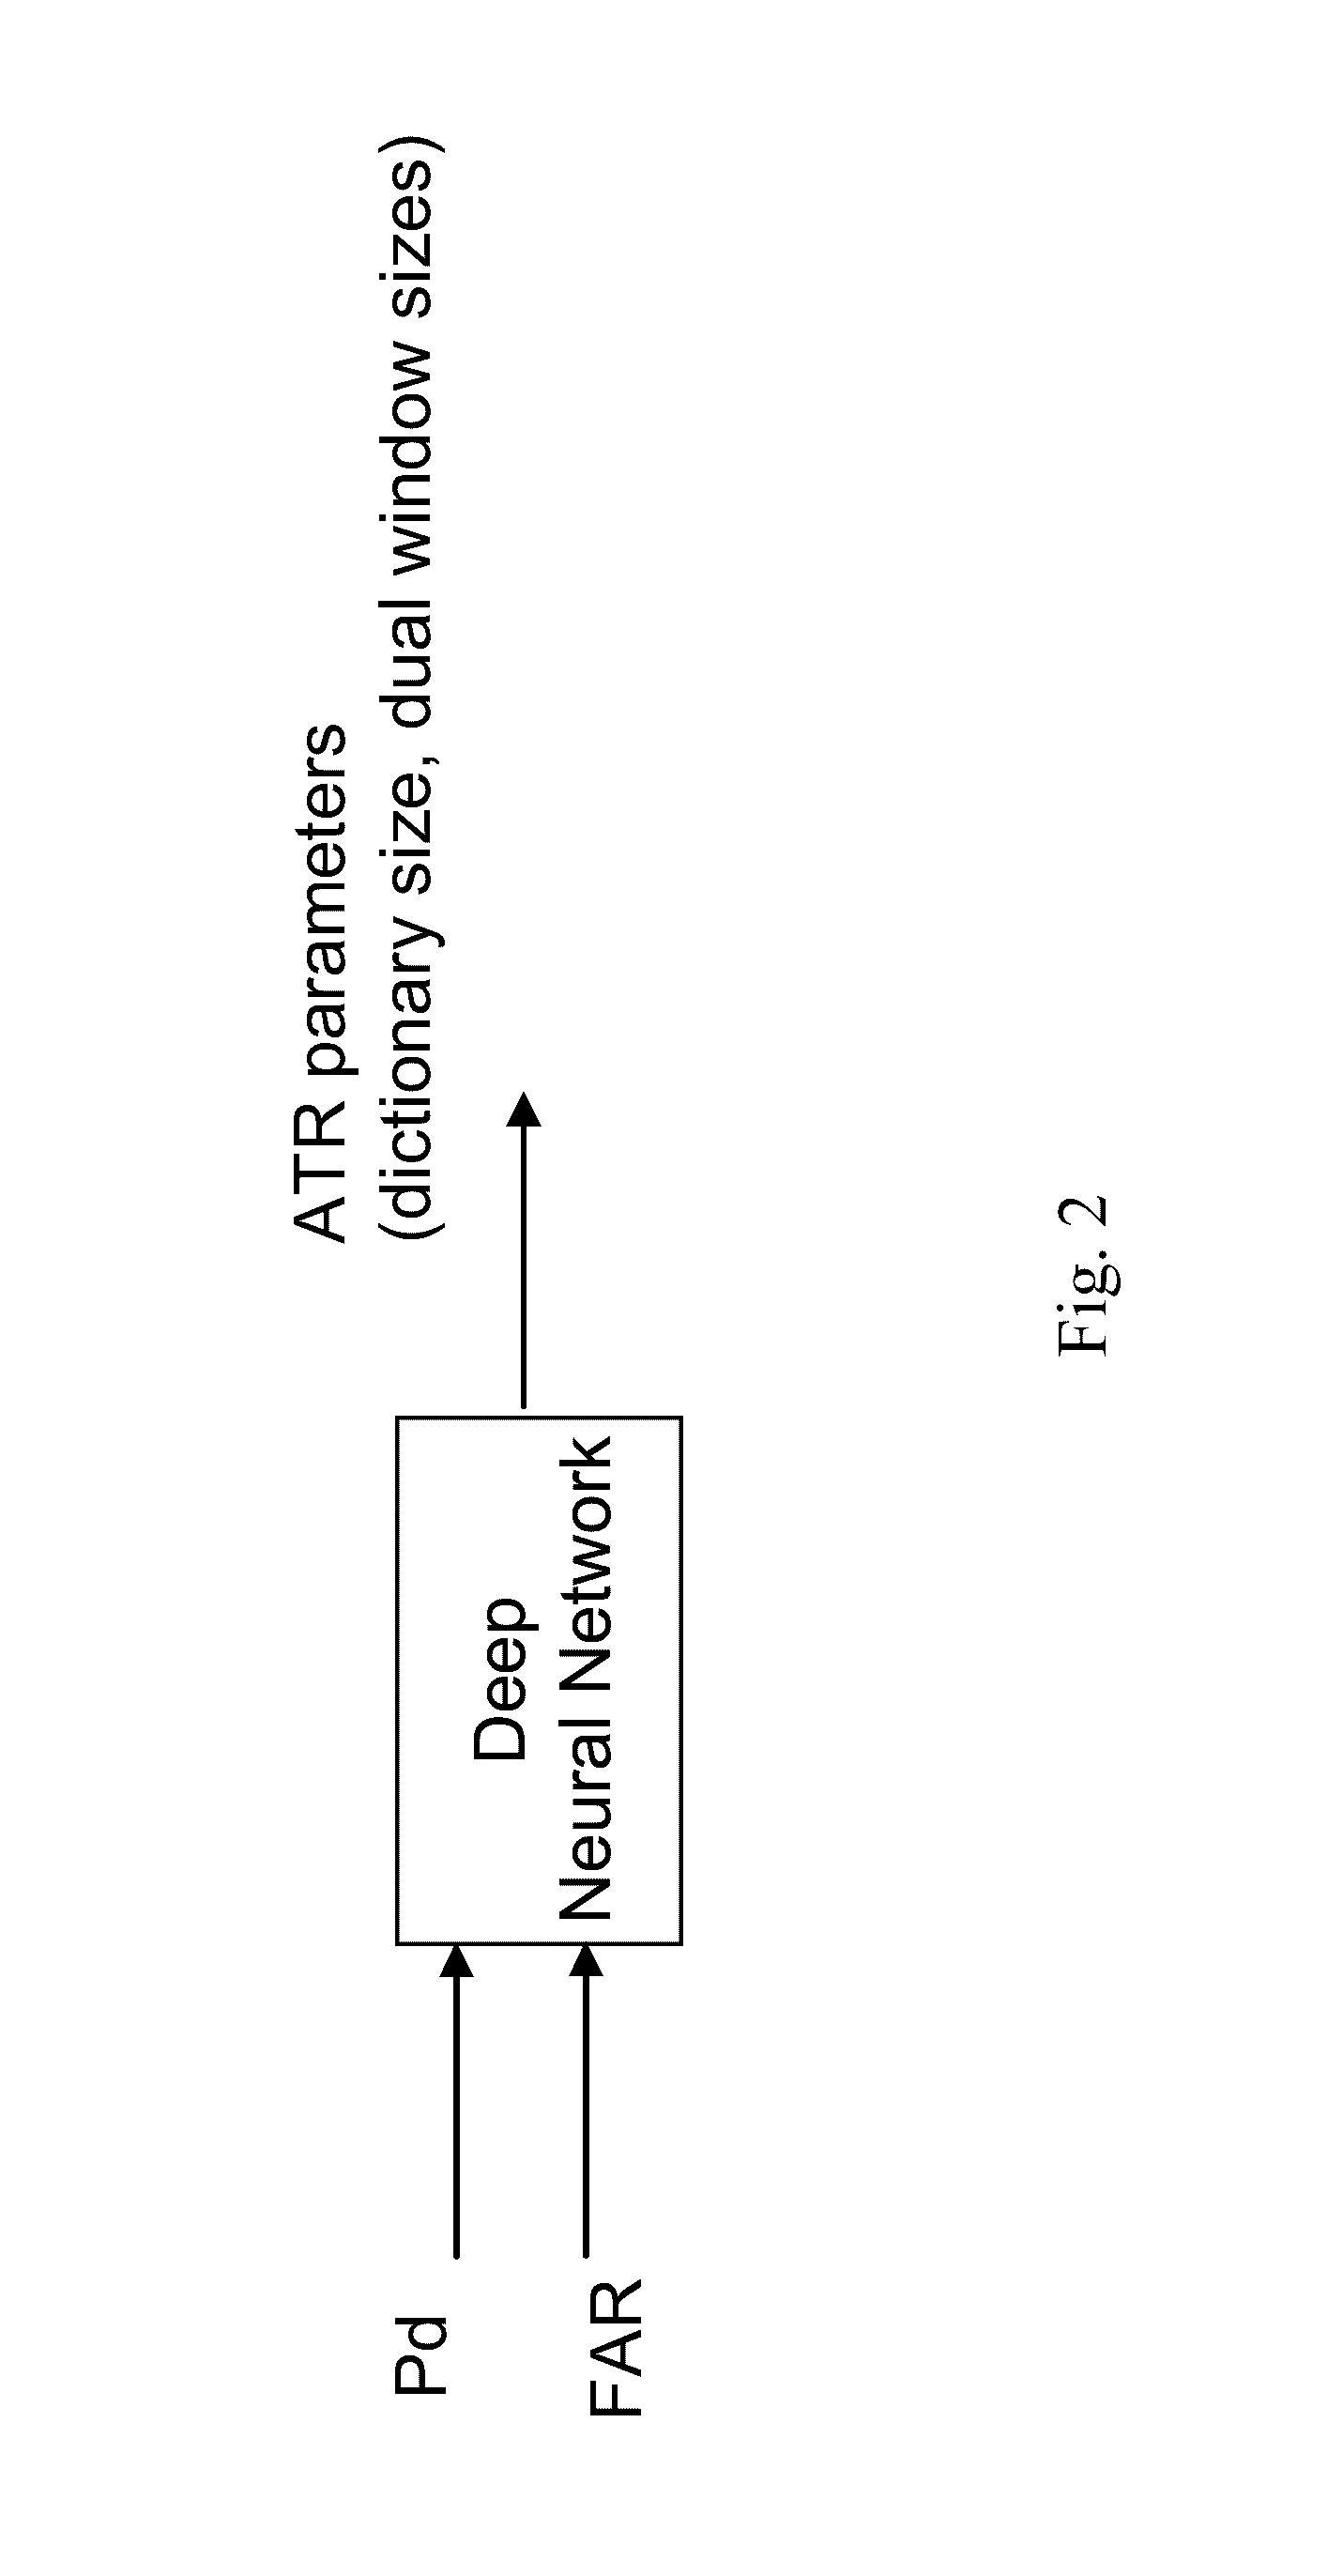 Automatic target recognition system with online machine learning capability